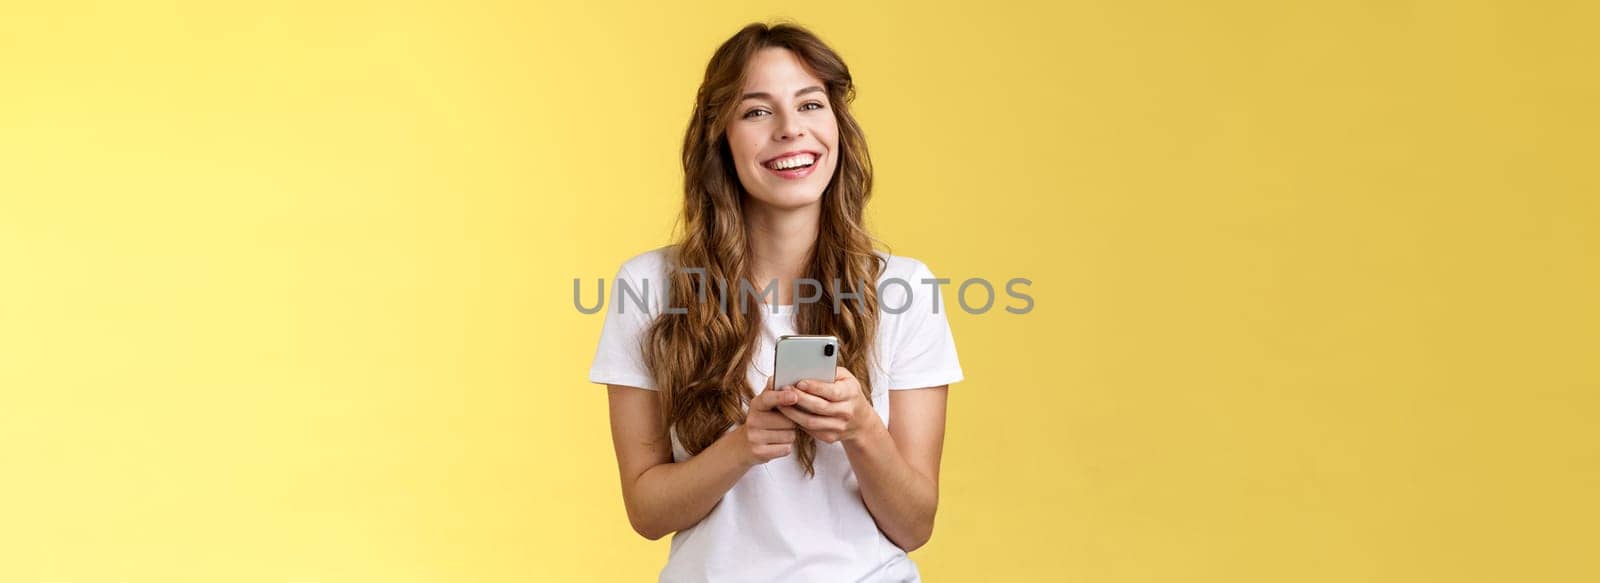 Lively enthusiastic friendly smiling happy woman using smartphone texting messaging friend checking social media feed browsing internet hold mobile phone laughing happily yellow background.